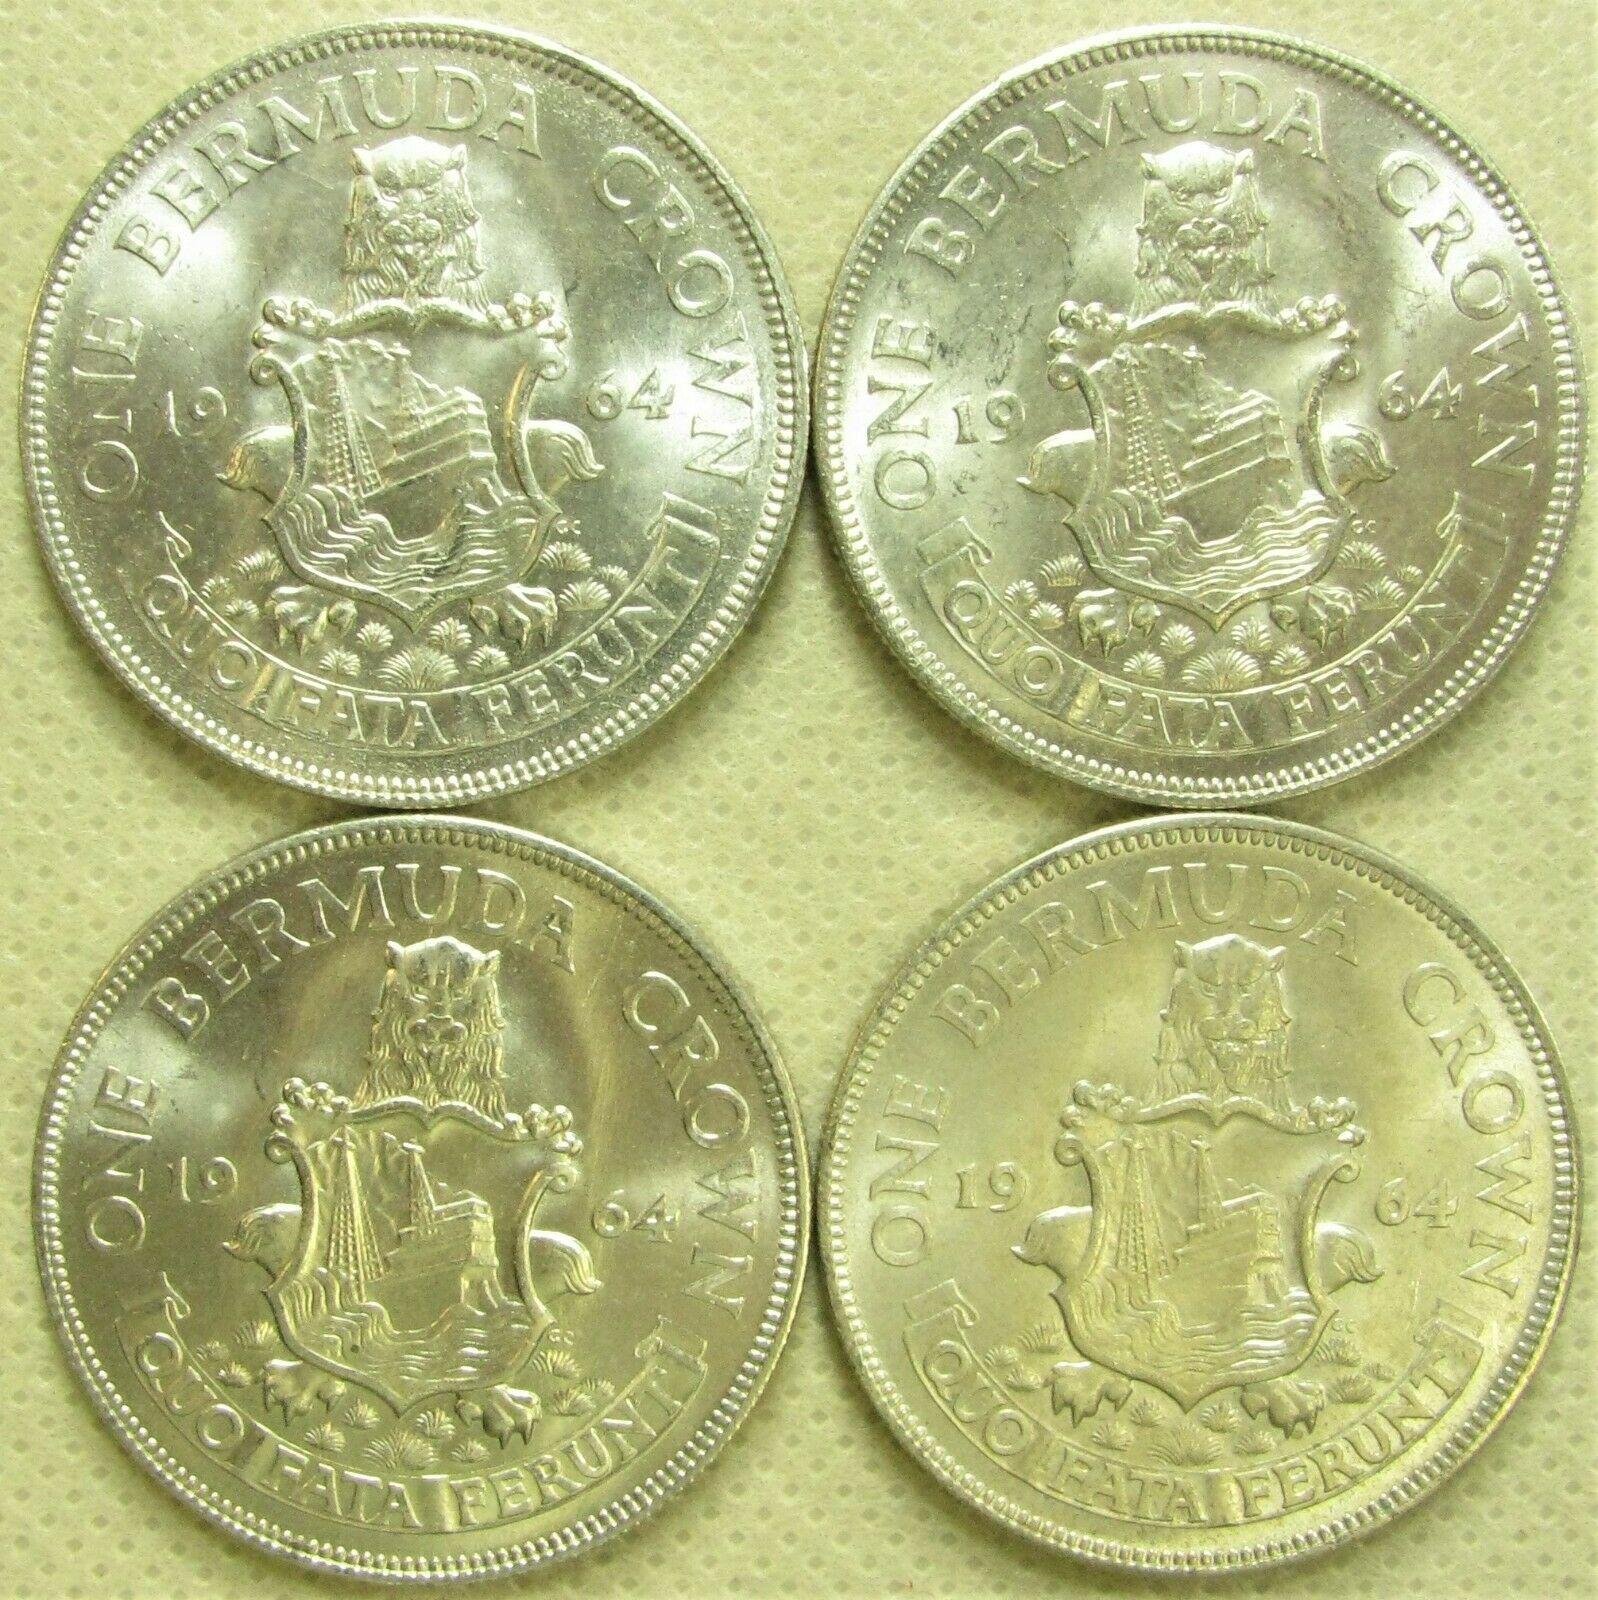 1964 Bermuda Silver Crowns, Lot Of 4, 1.45+ Oz Actual Silver Weight Total